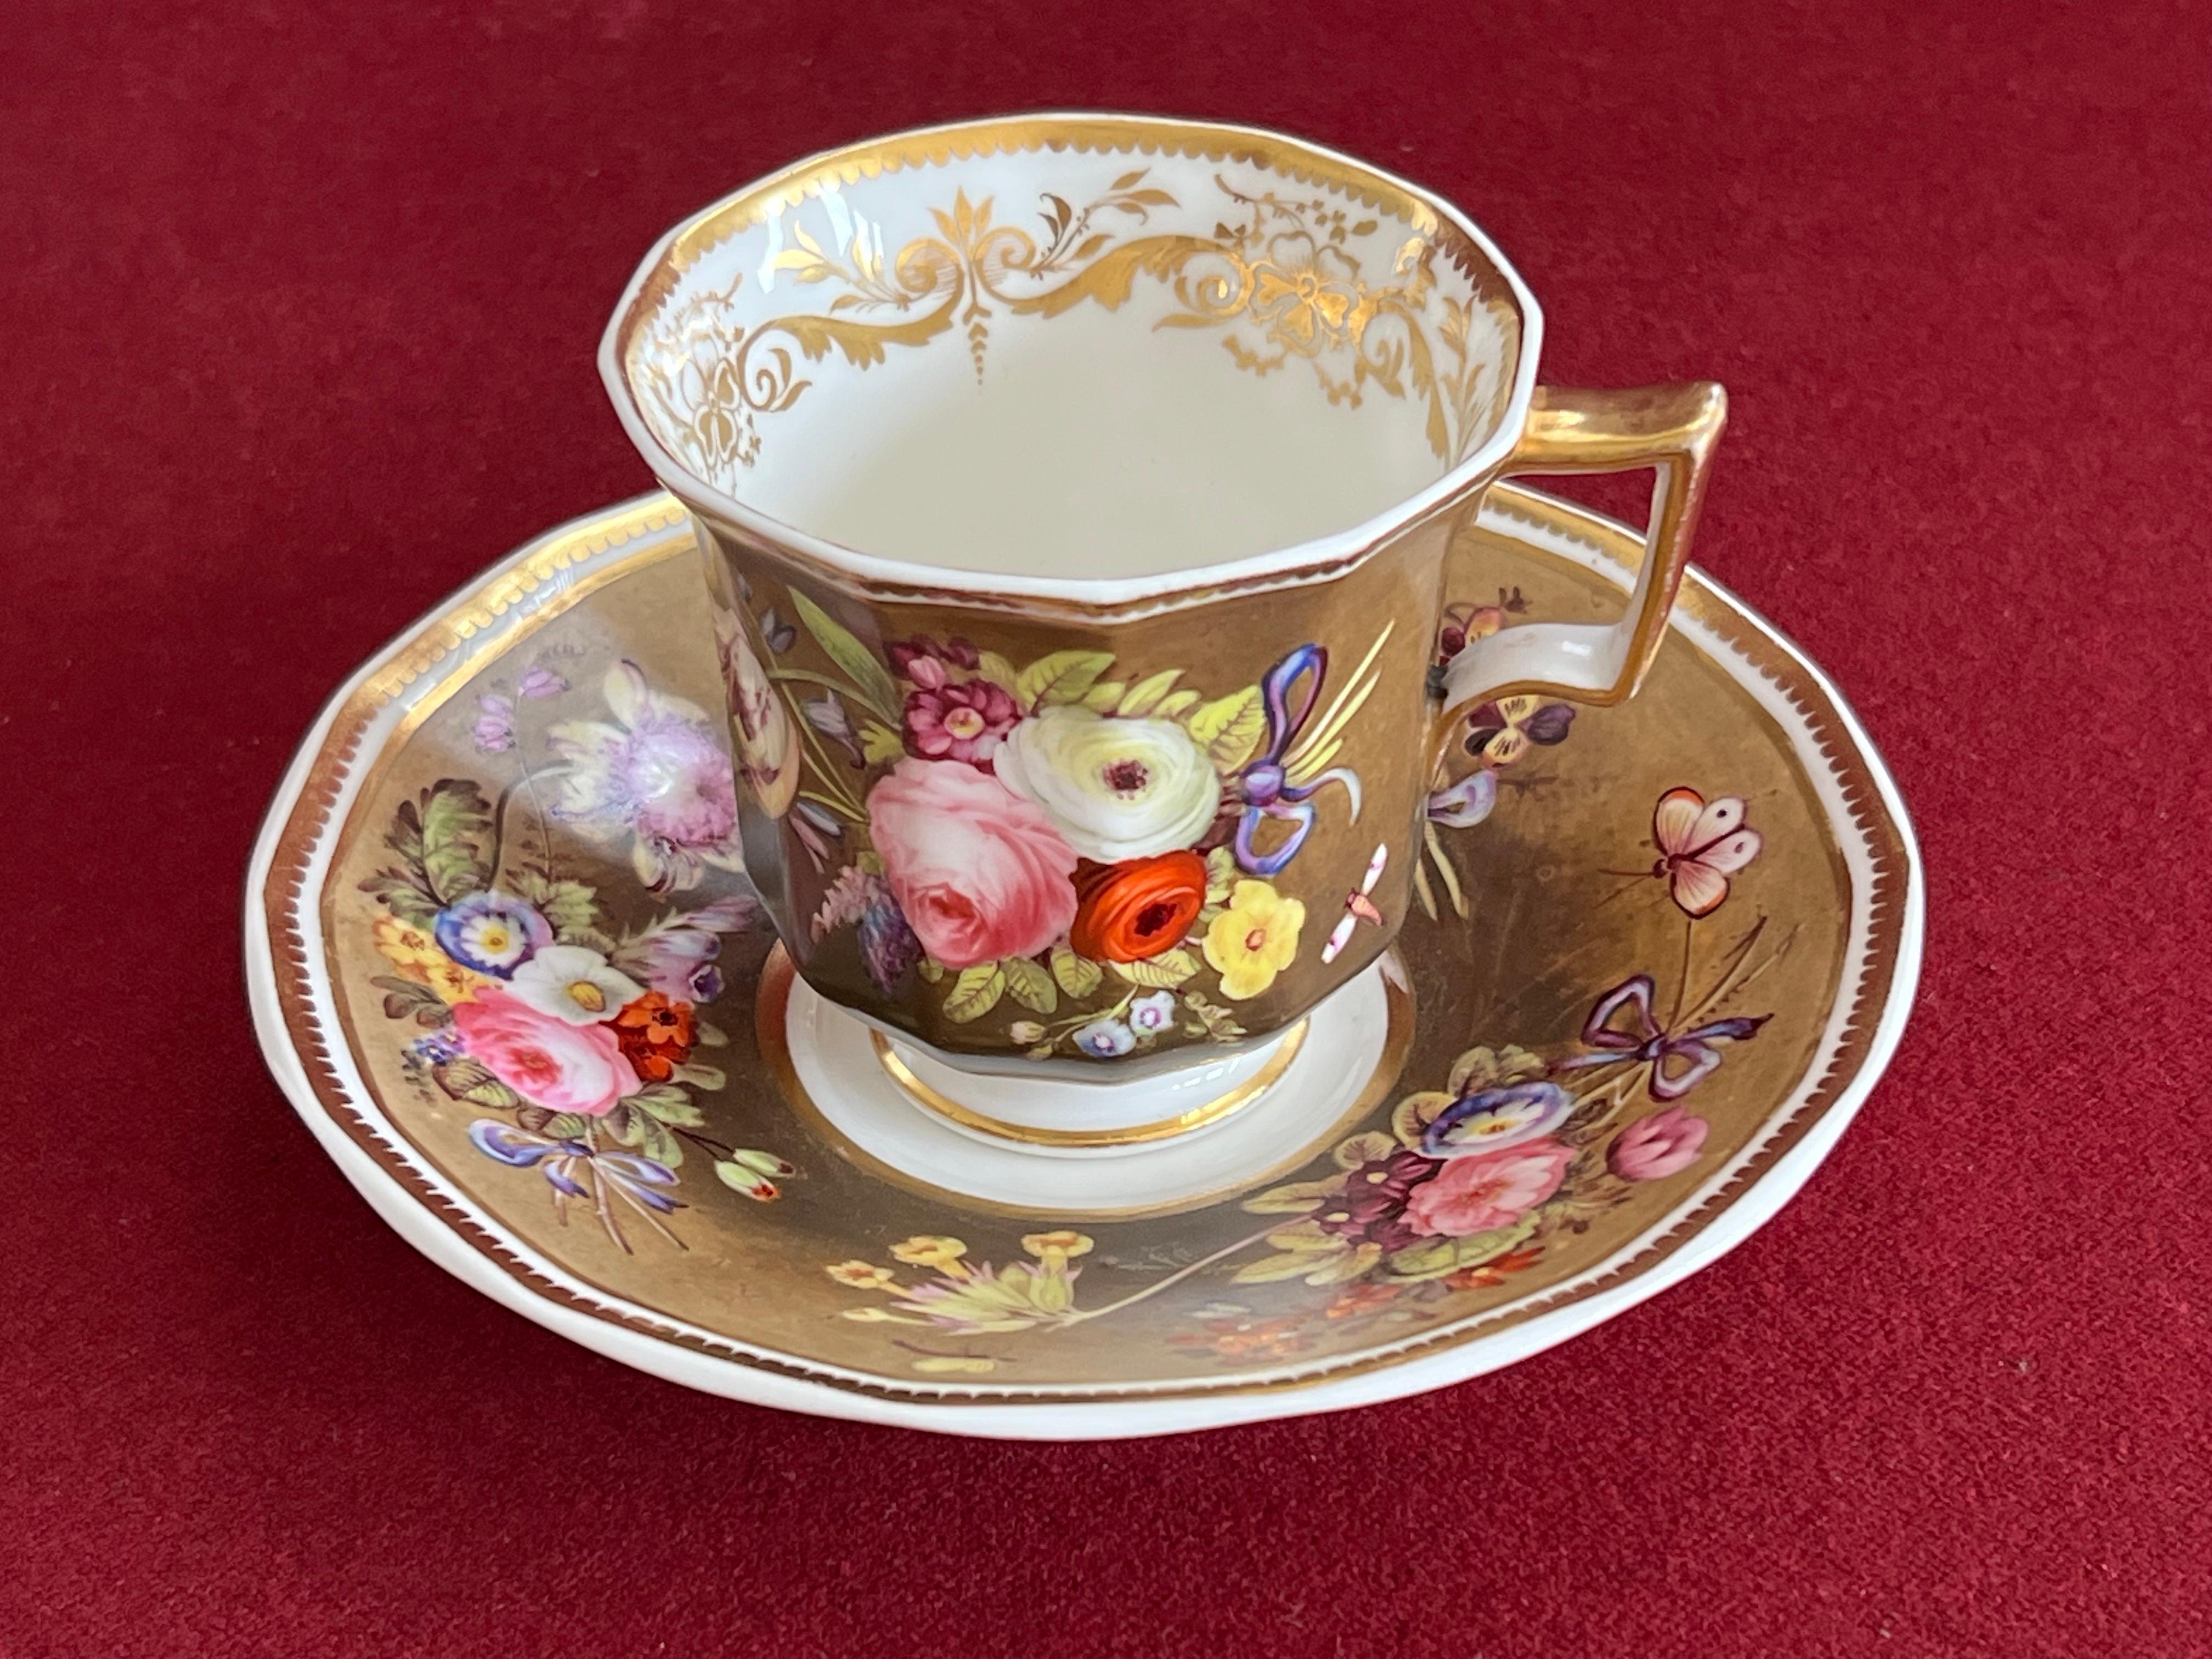 A Spode porcelain Coffee Cup and Saucer very finely decorated c.1830 For Sale 2